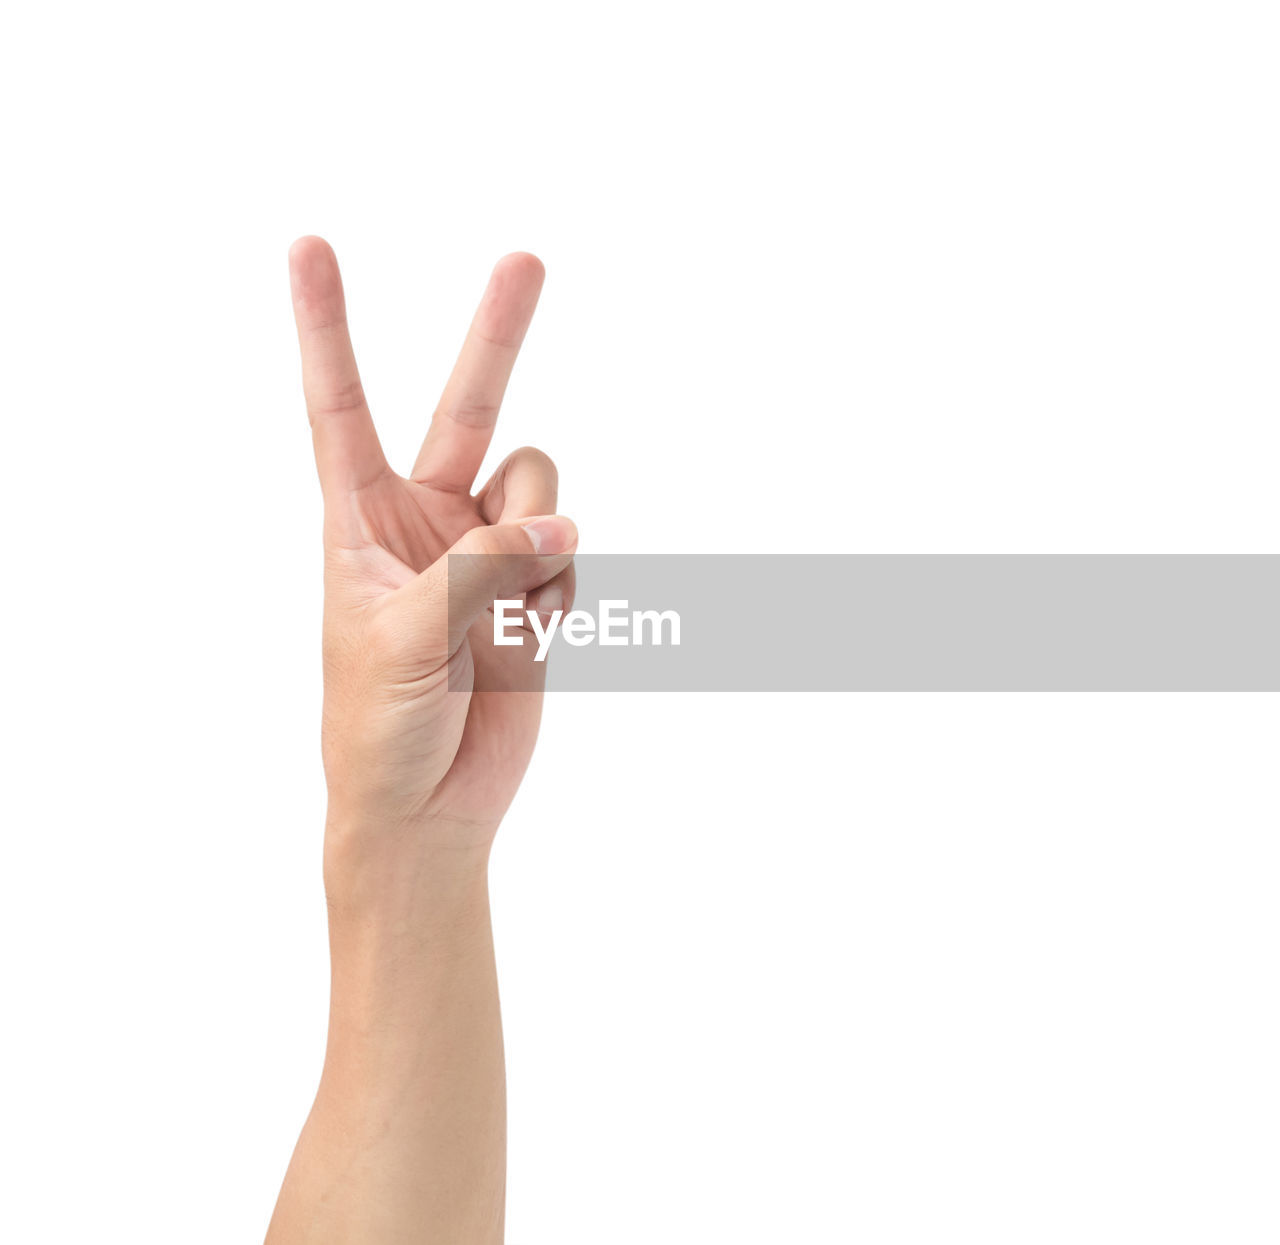 Cropped image of hand gesturing peace sign over white background